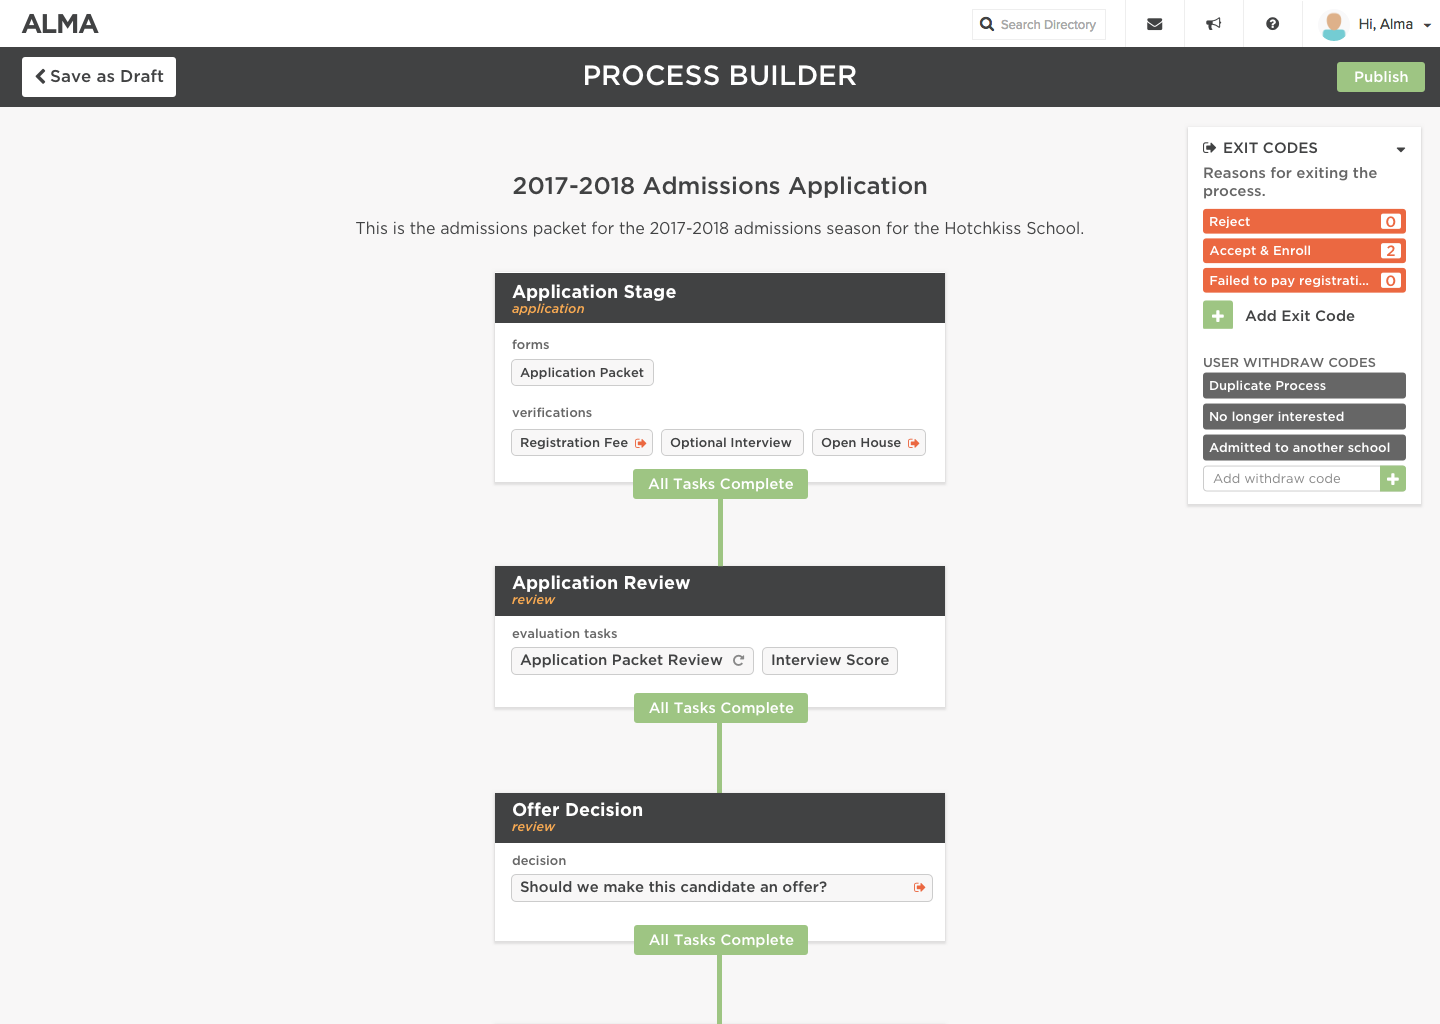 Admissions application process builder